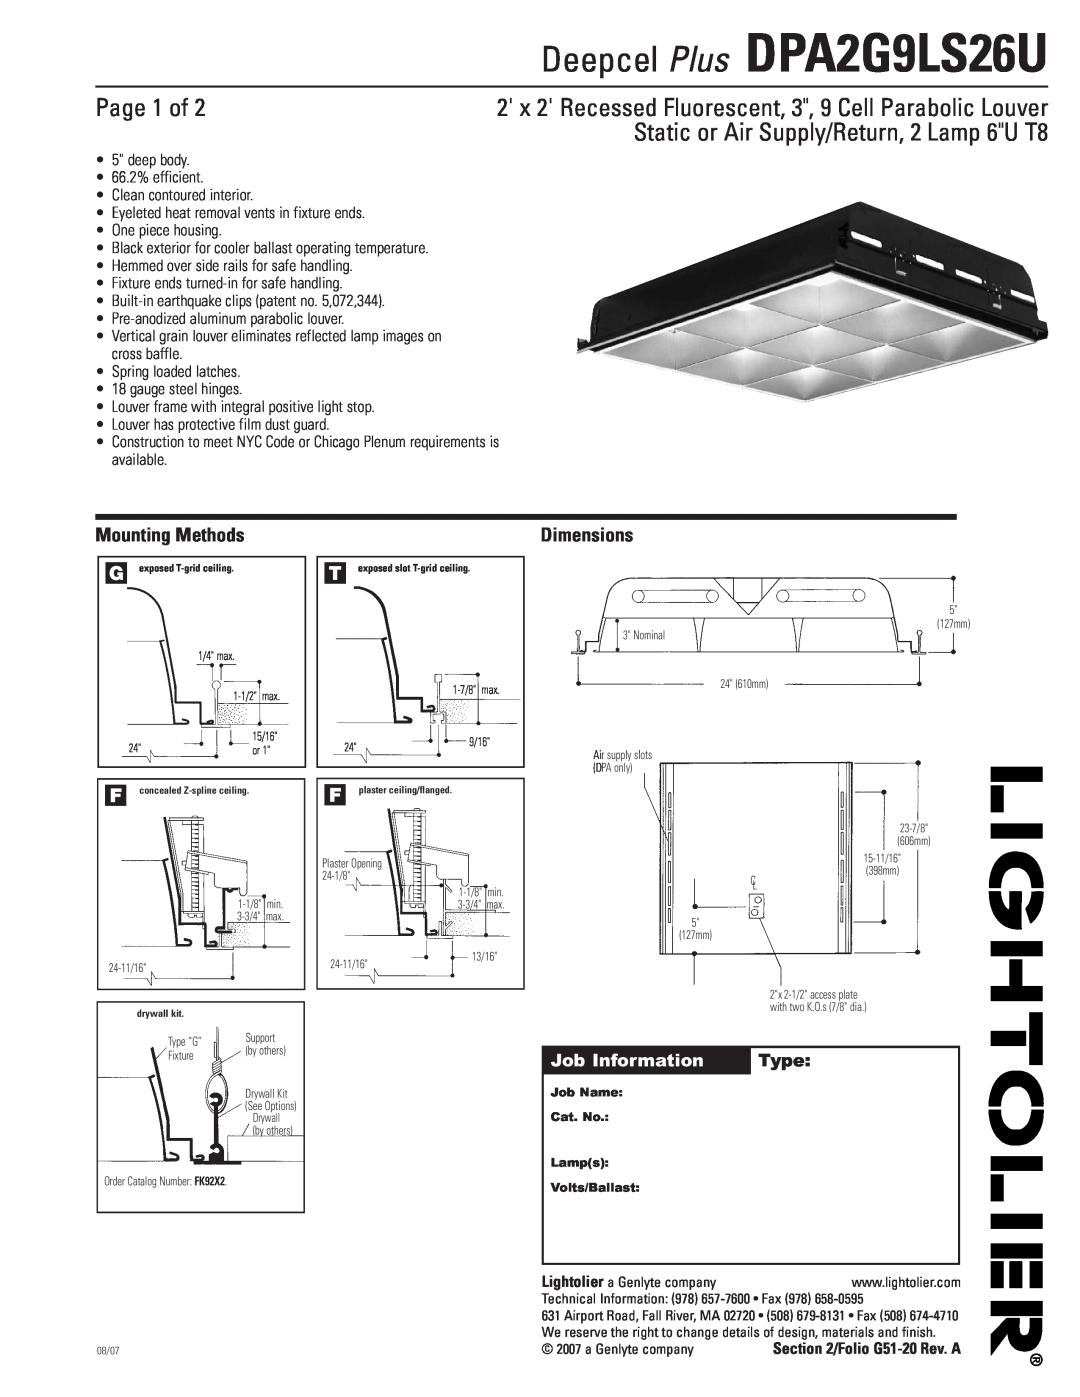 Lightolier DPA2G9LS26U dimensions Page 1 of, Static or Air Supply/Return, 2 Lamp 6U T8, Mounting Methods, Dimensions, Type 